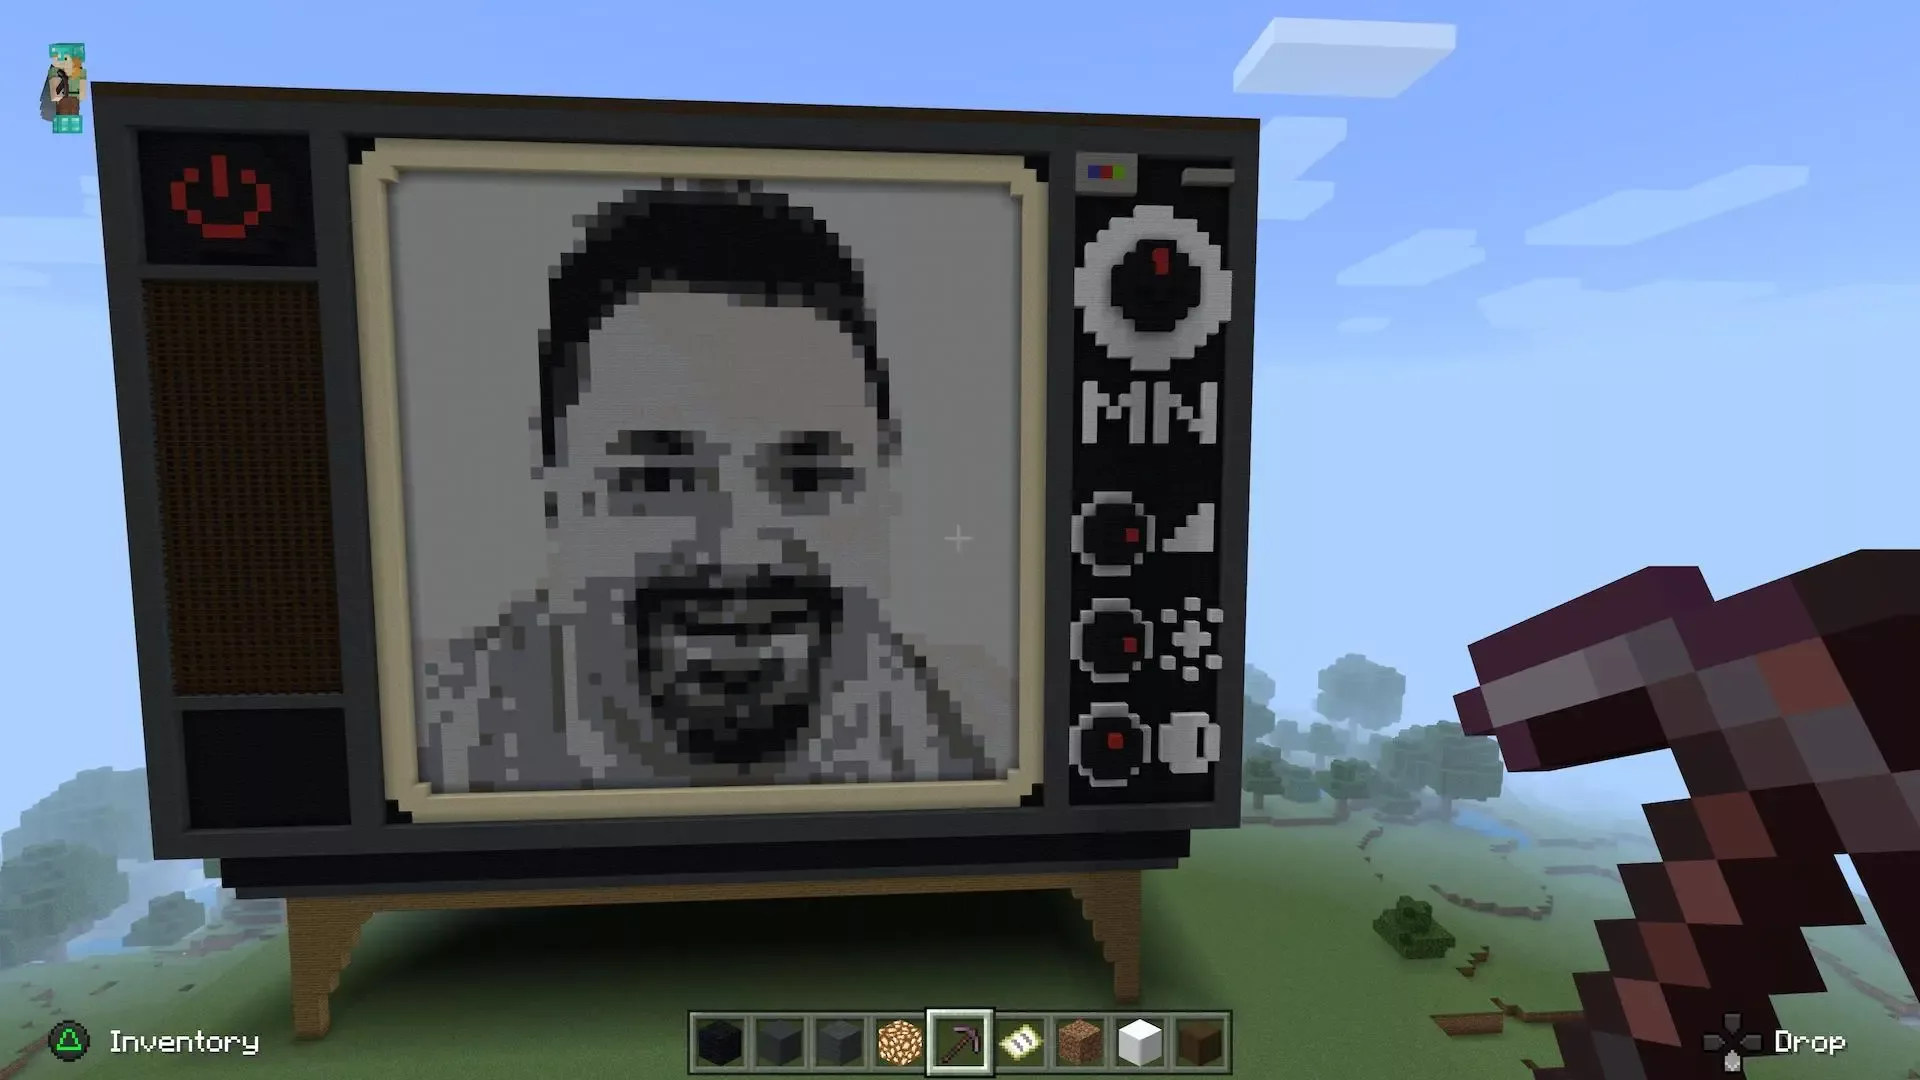 A tribute to Paul's friend Mark - a pixel art rendition of Mark’s face, rendered in a cathode-ray TV within Minecraft